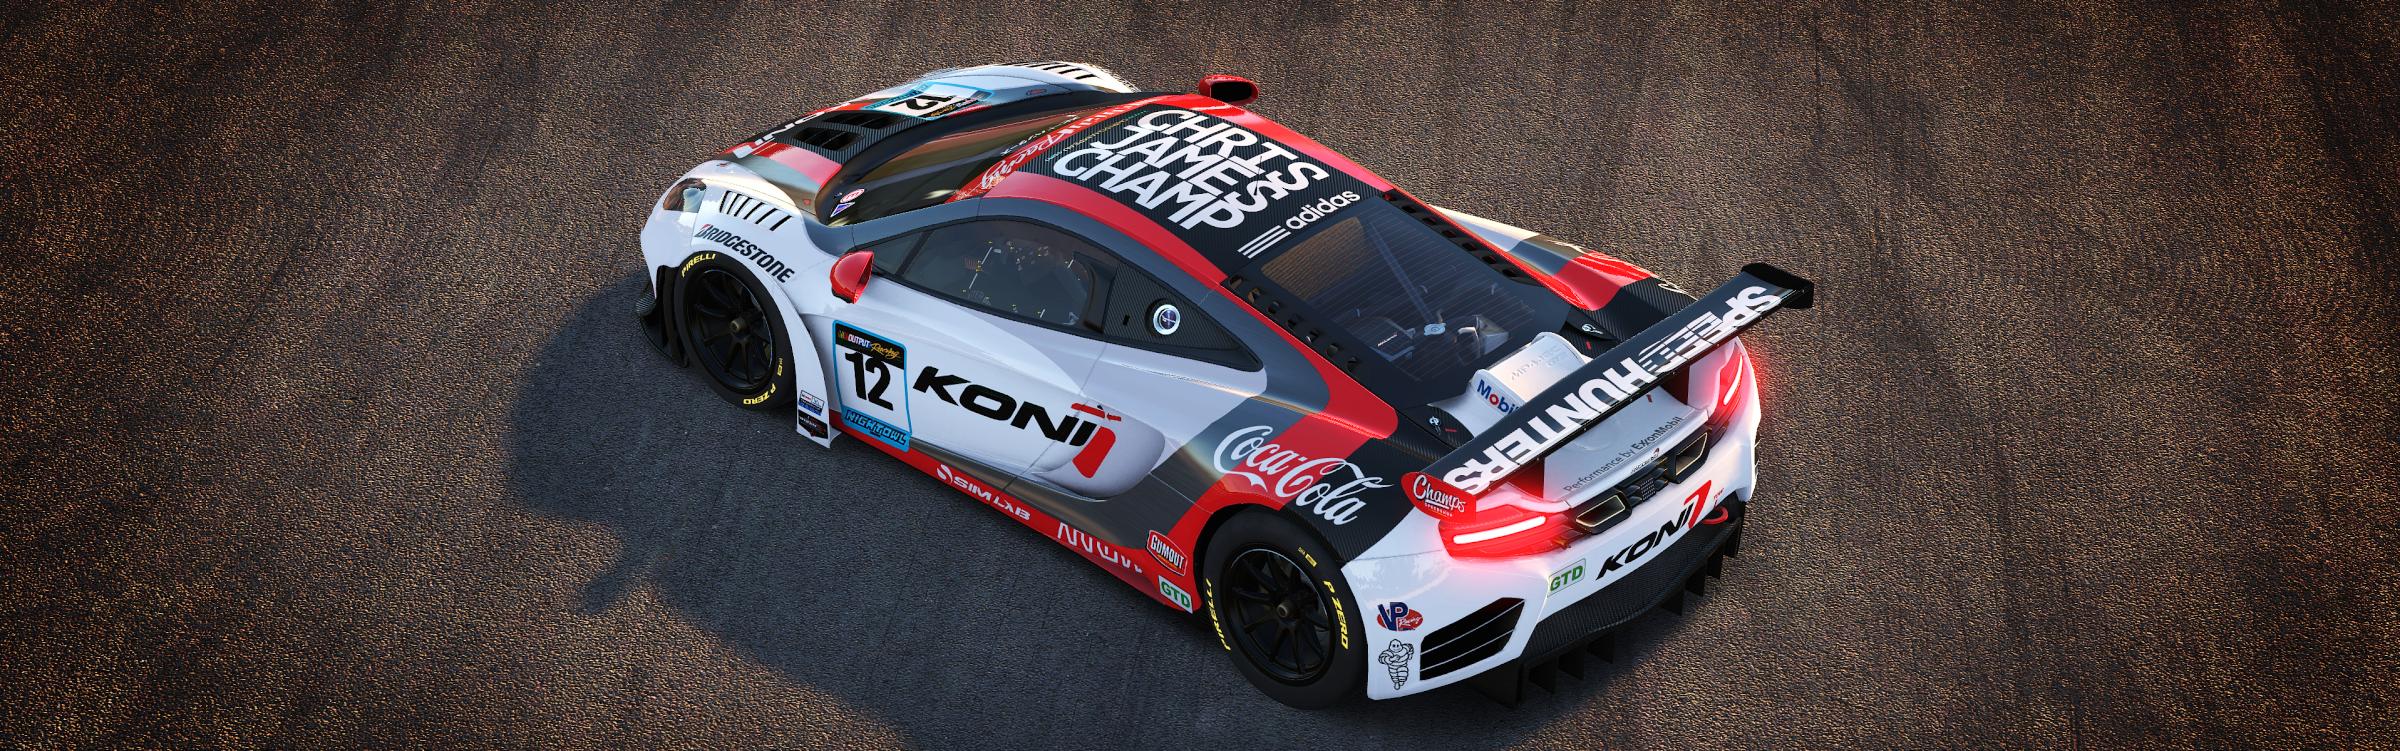 Preview of Koni Powered McLaren MP4 GT3 by Chris Champeau